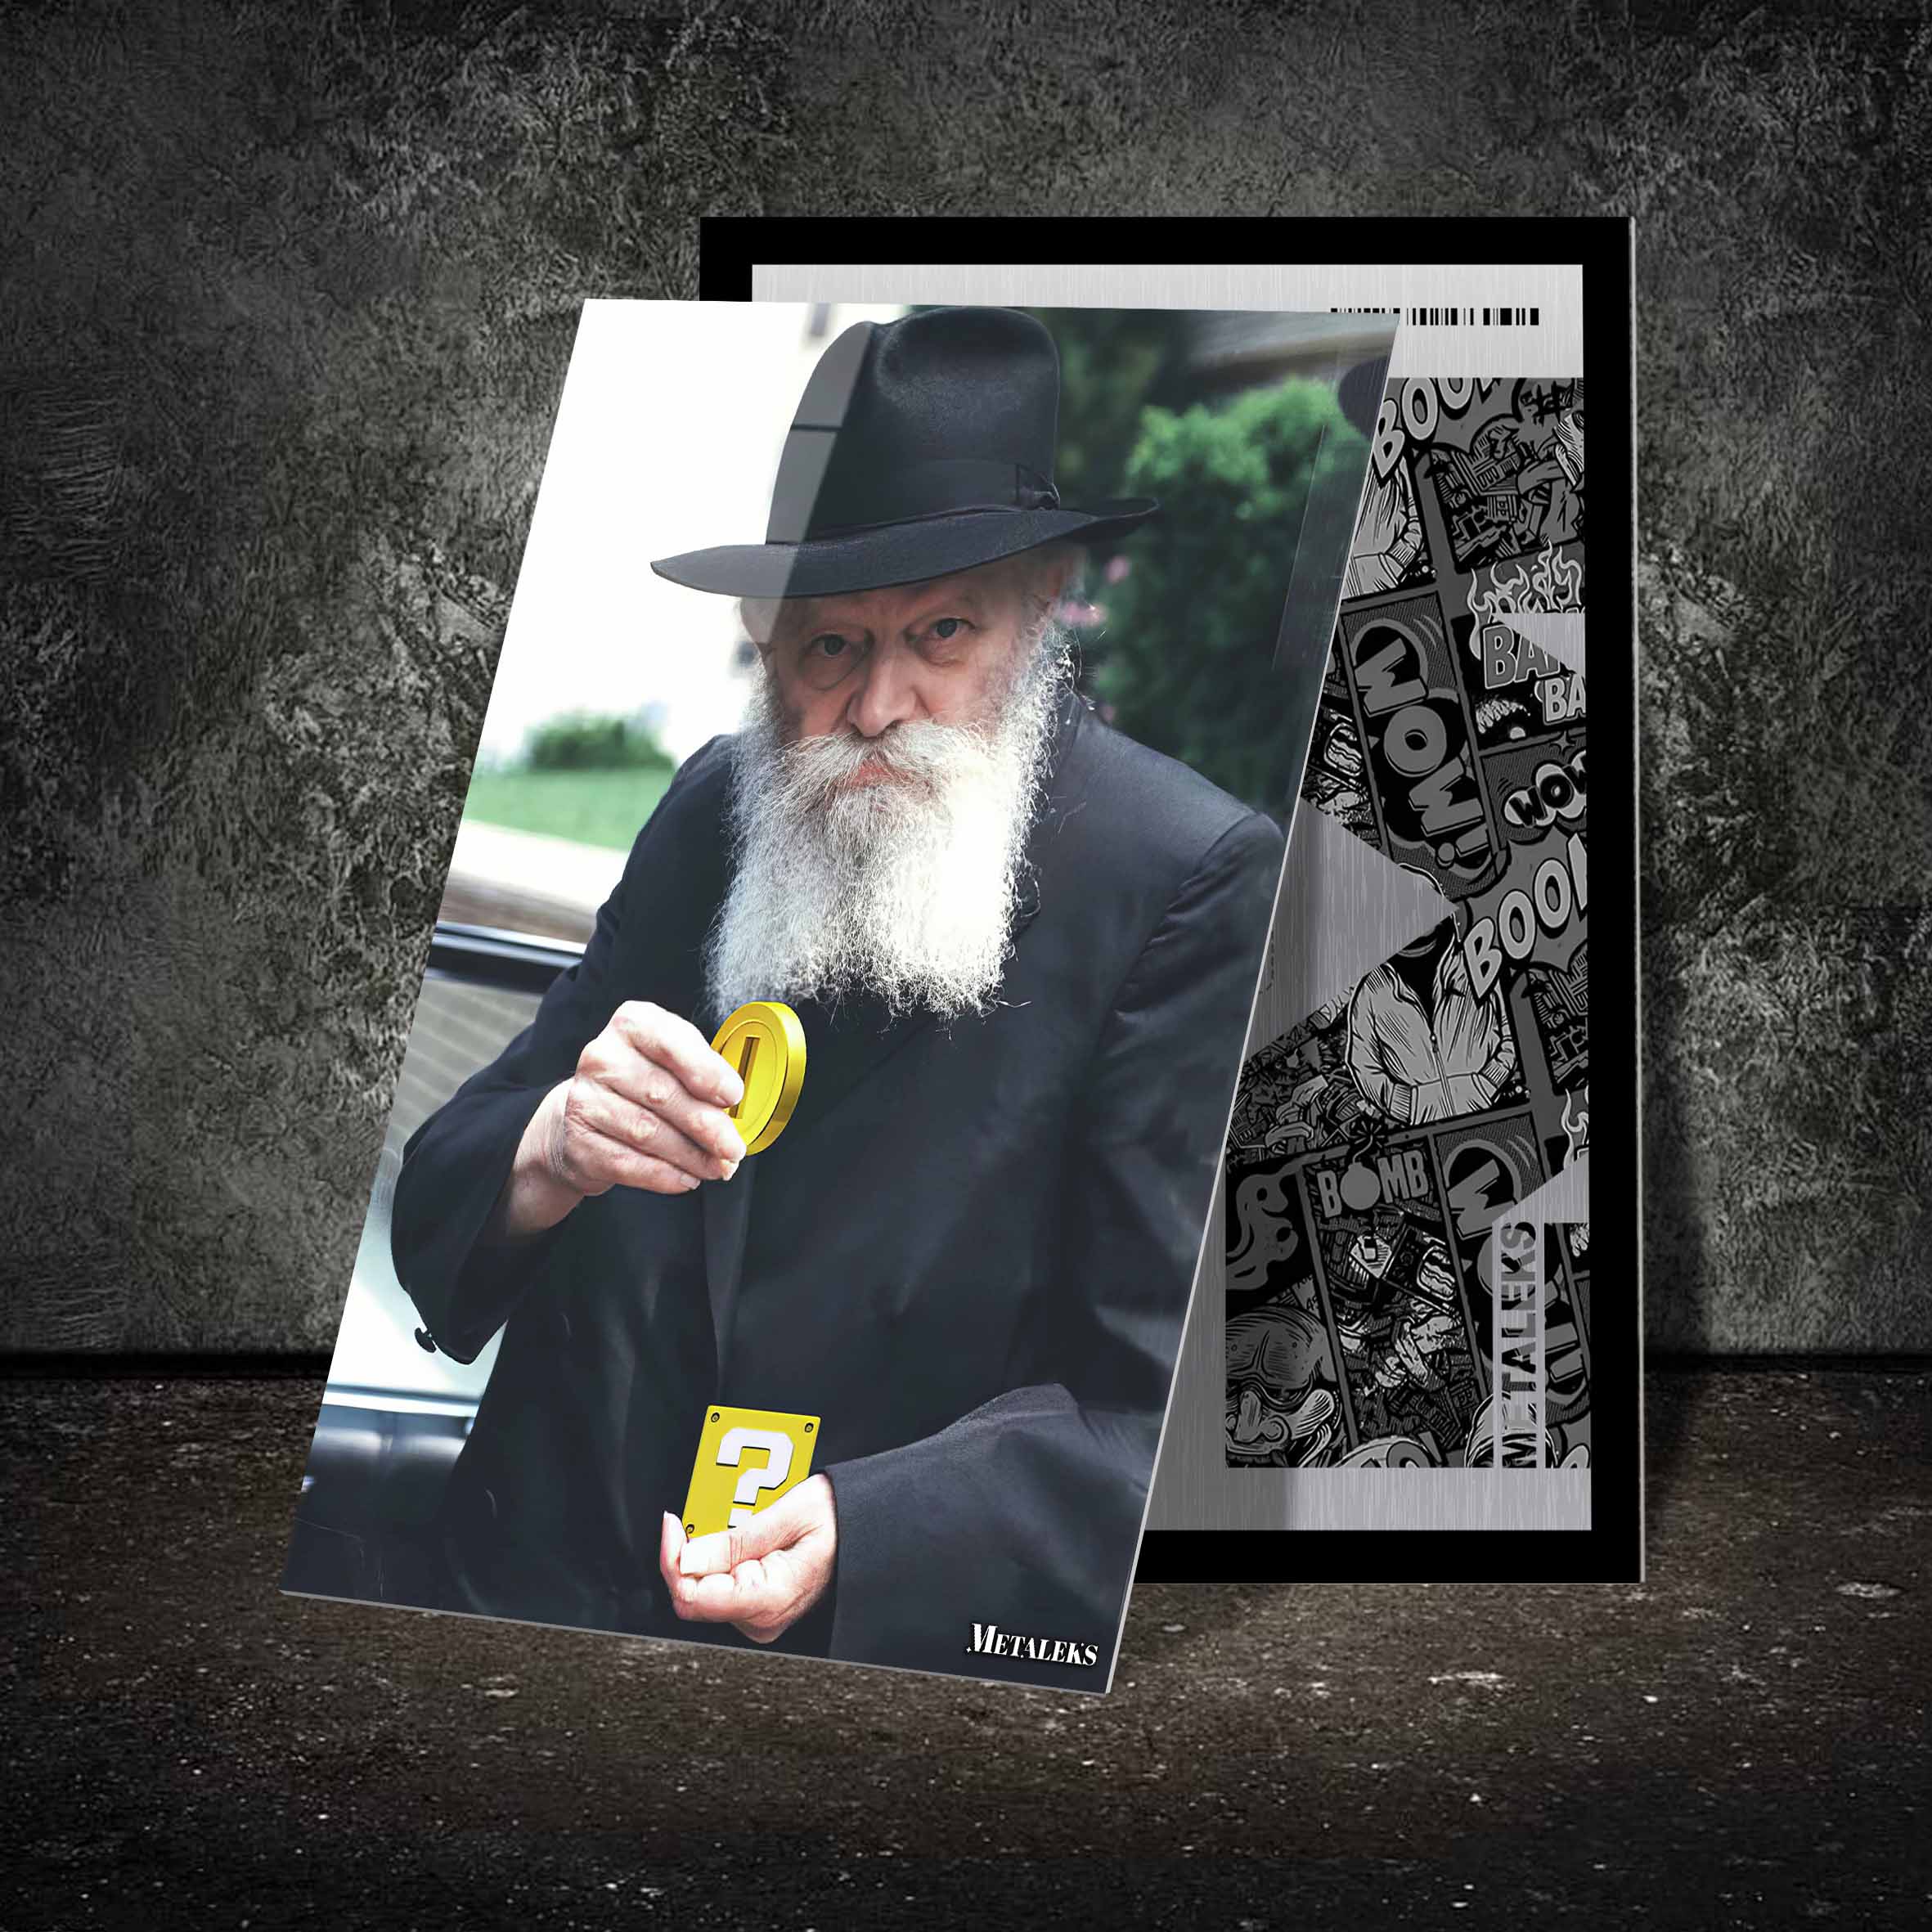 Rebbe Gives-designed by @Vinahayum